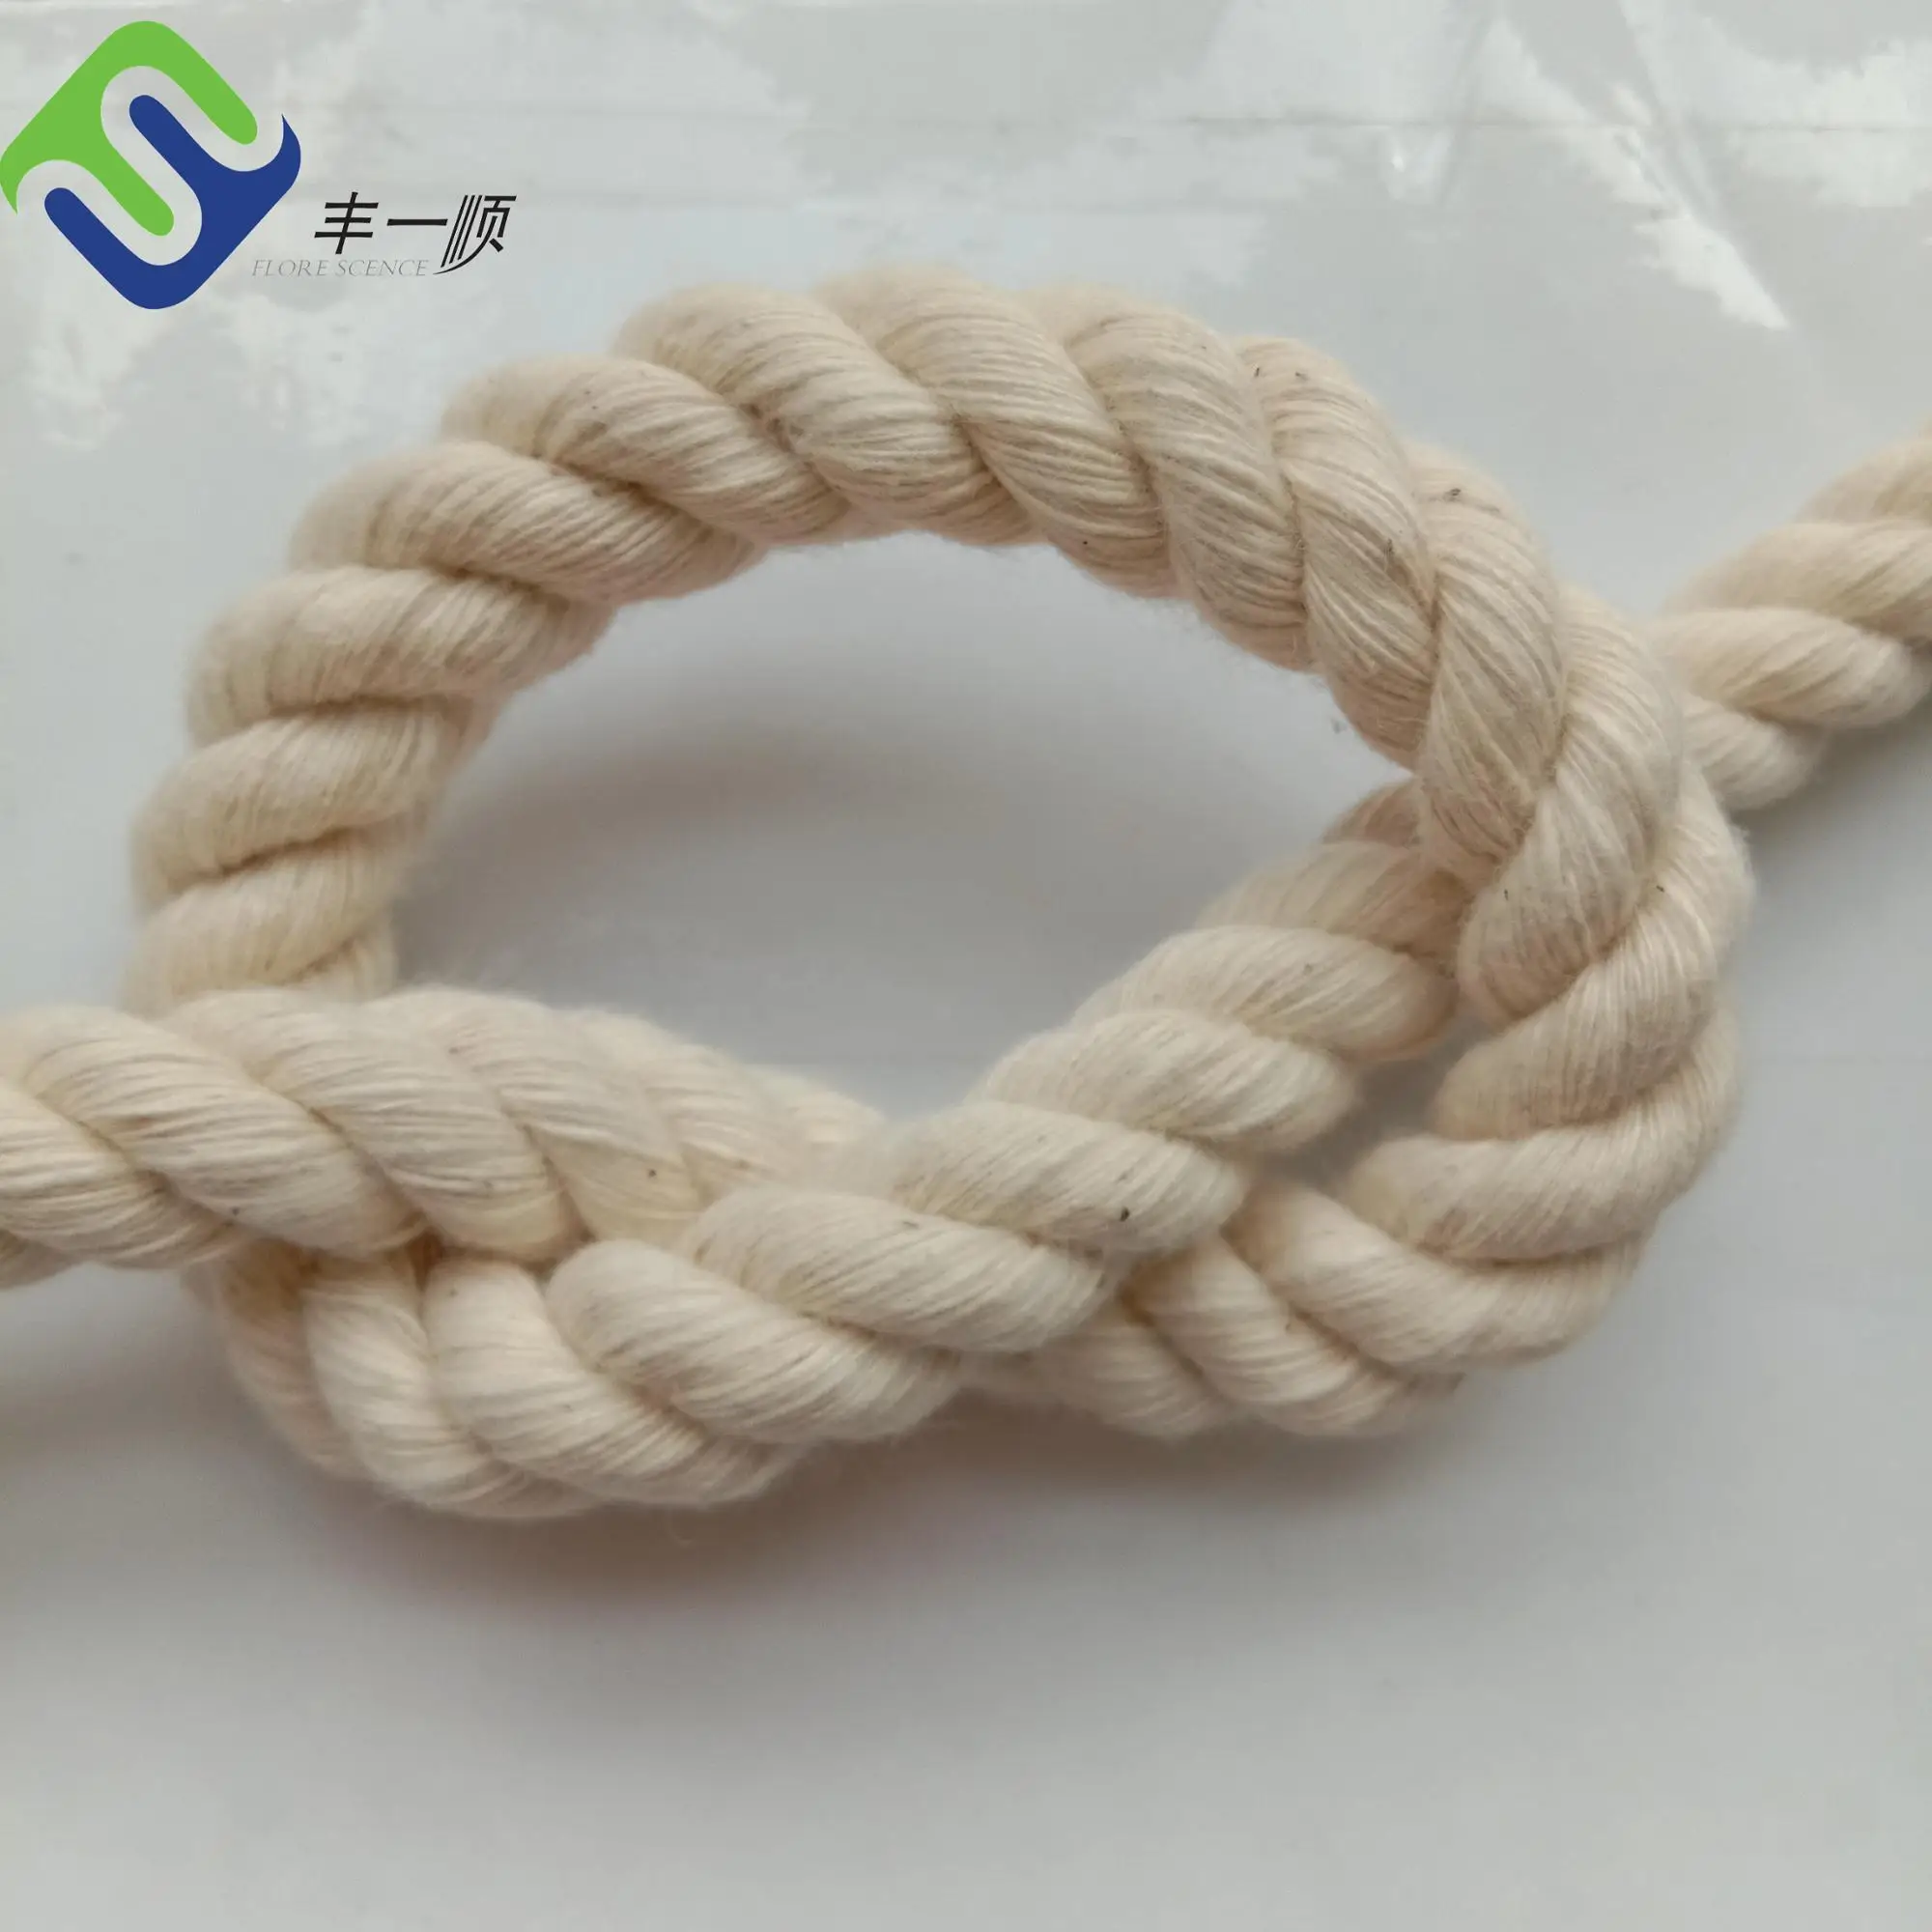 where to buy cheap rope